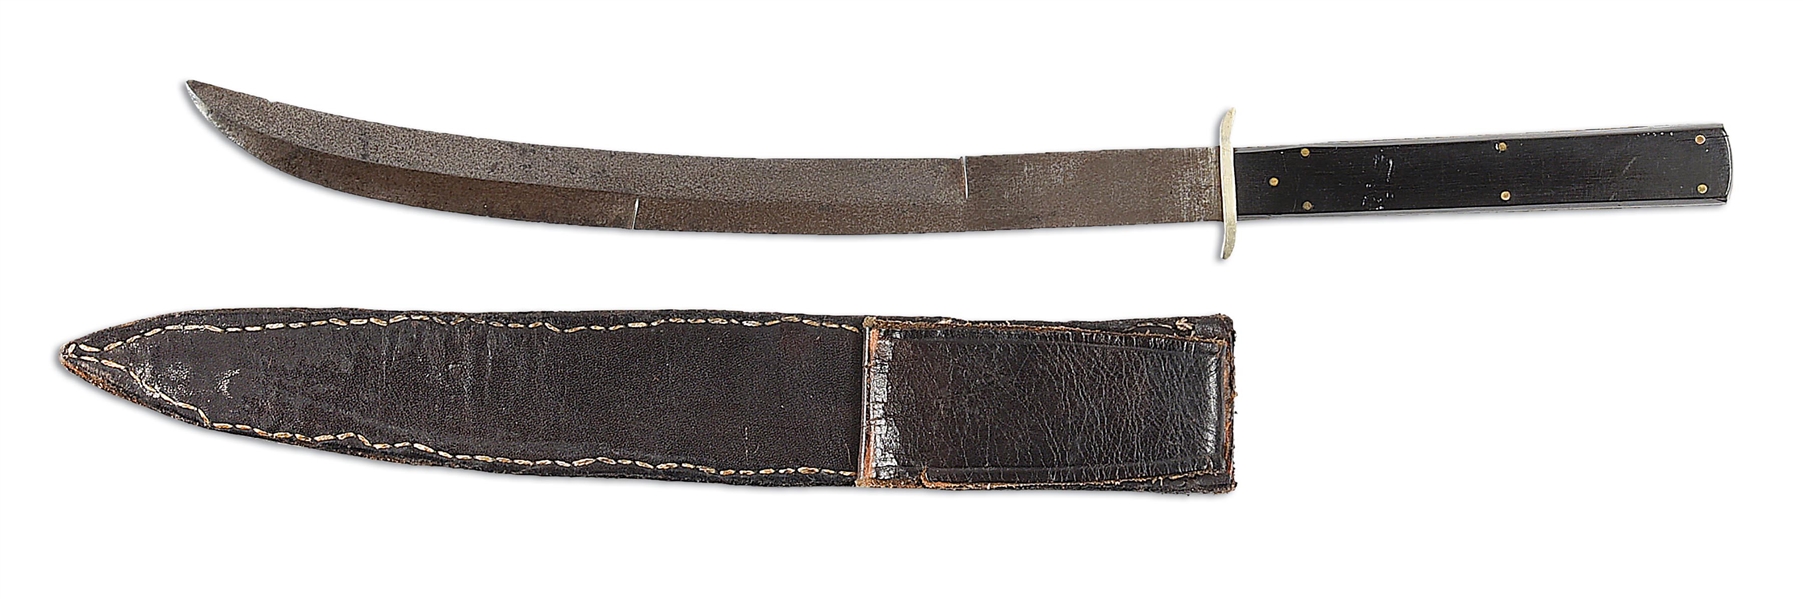 BOWIE KNIFE EBONY HANDLE ATTRIBUTED TO SAMUEL JACKSON (BALTIMORE).